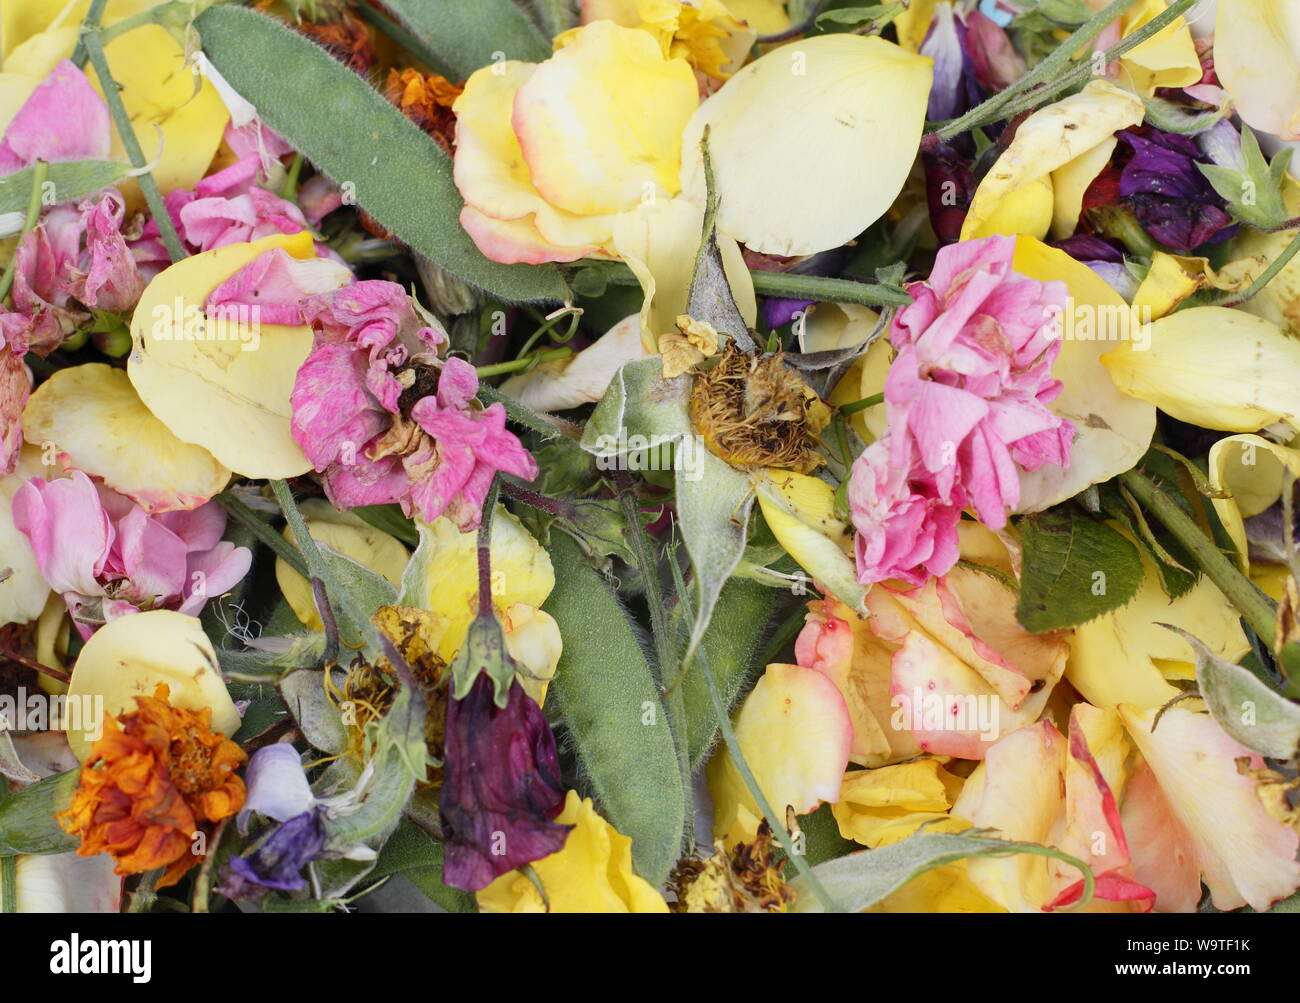 Flower deadheads - roses, sweet peas and marigolds - in summer. UK Stock Photo